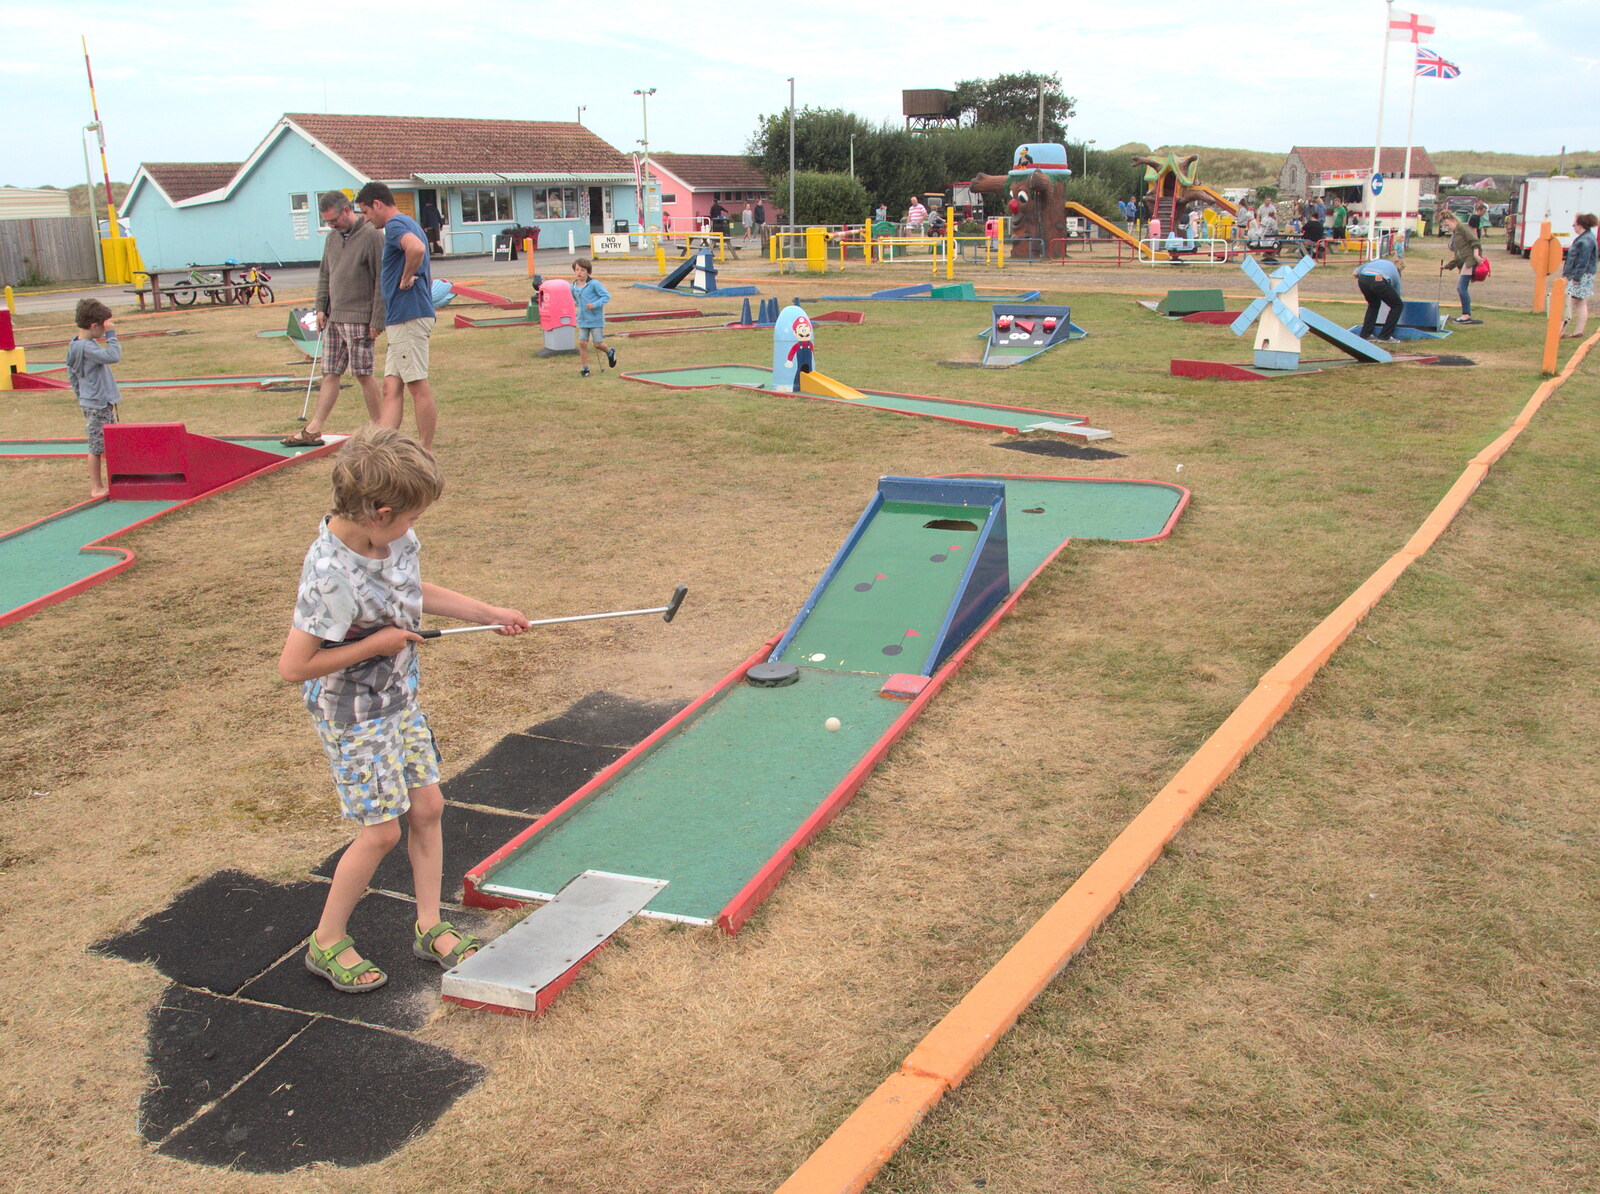 A busy pitch-and-putt course from A Trip to Waxham Sands,  Horsey, Norfolk - 27th August 2016